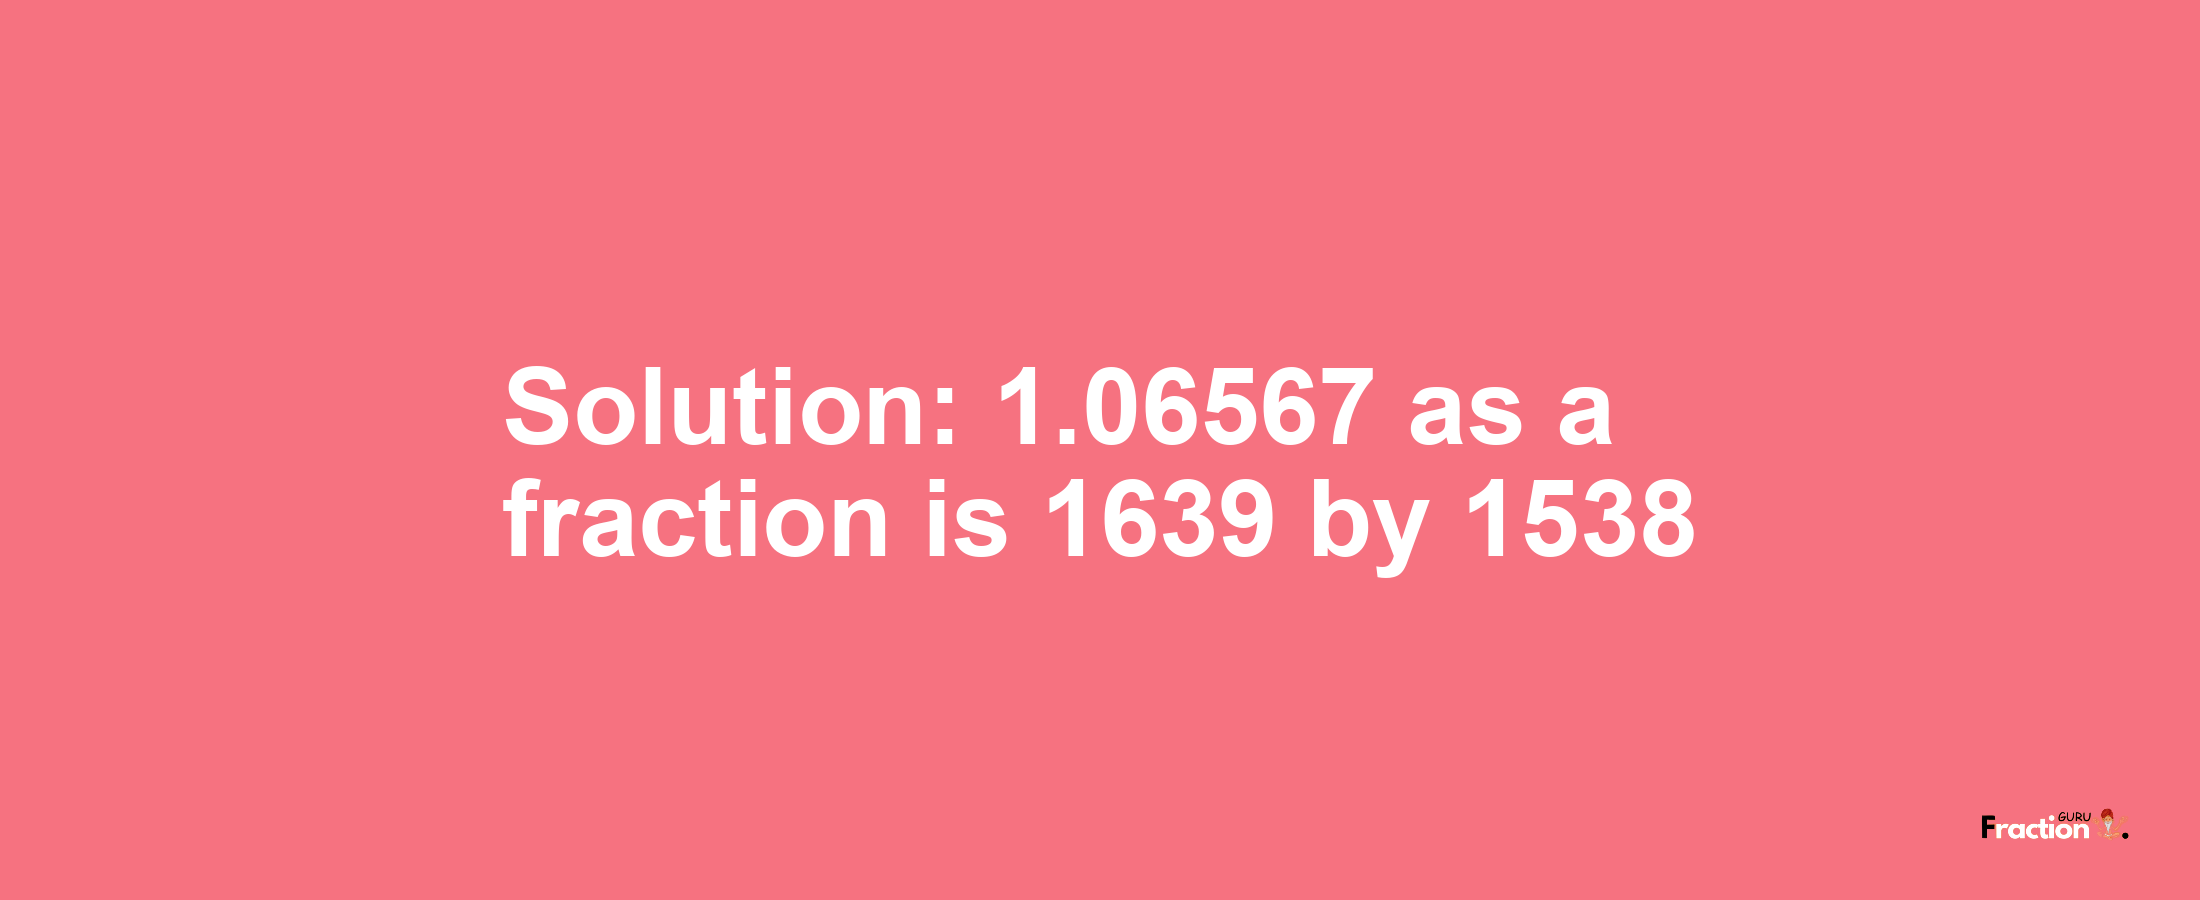 Solution:1.06567 as a fraction is 1639/1538